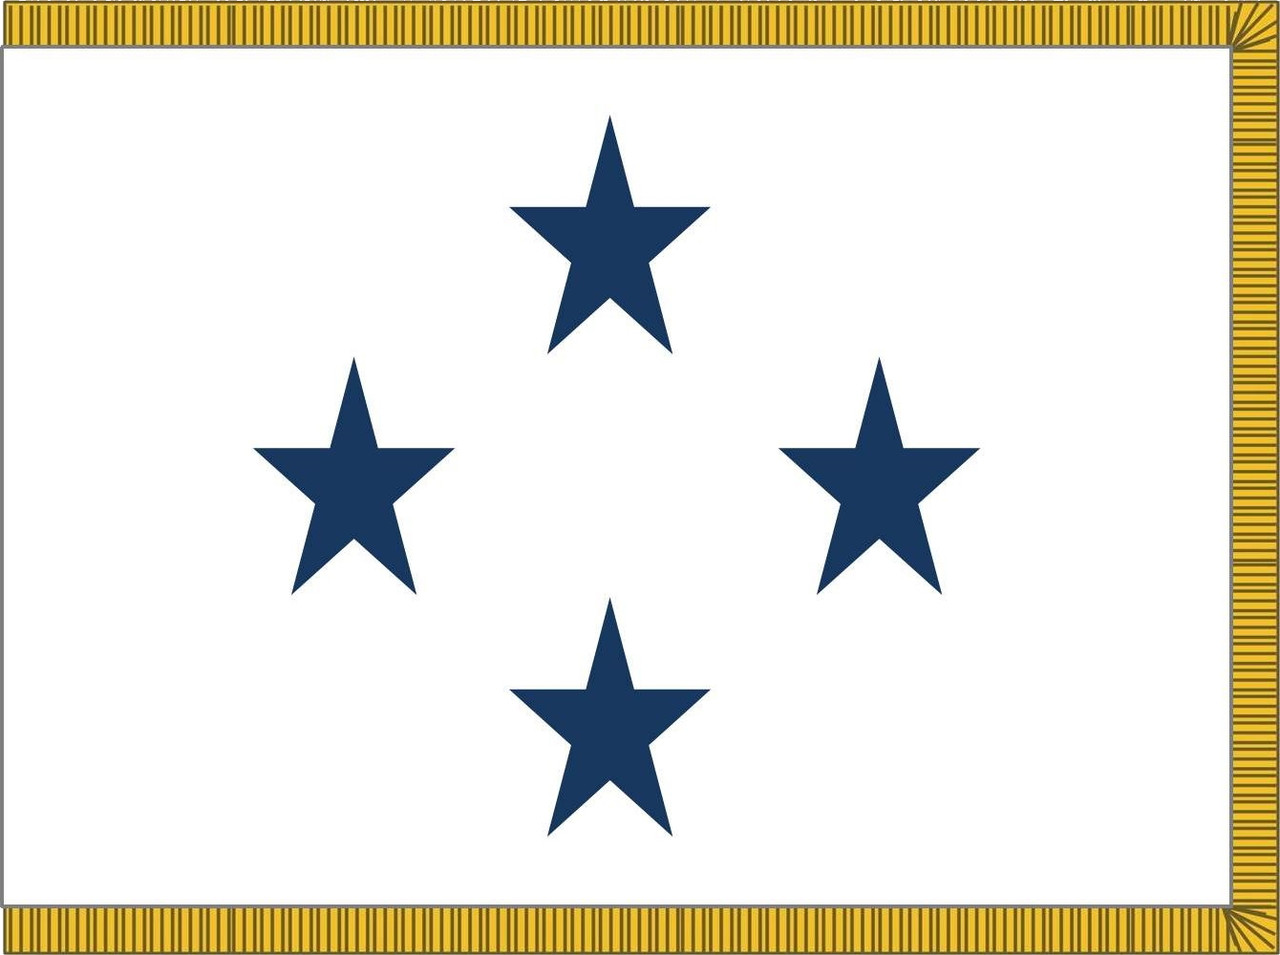 Navy Non-Seagoing Admiral Flag, 4 Star Nylon Applique with Pole Hem and Gold Fringe, Size 4'4" x 5'6", 4104054ADN